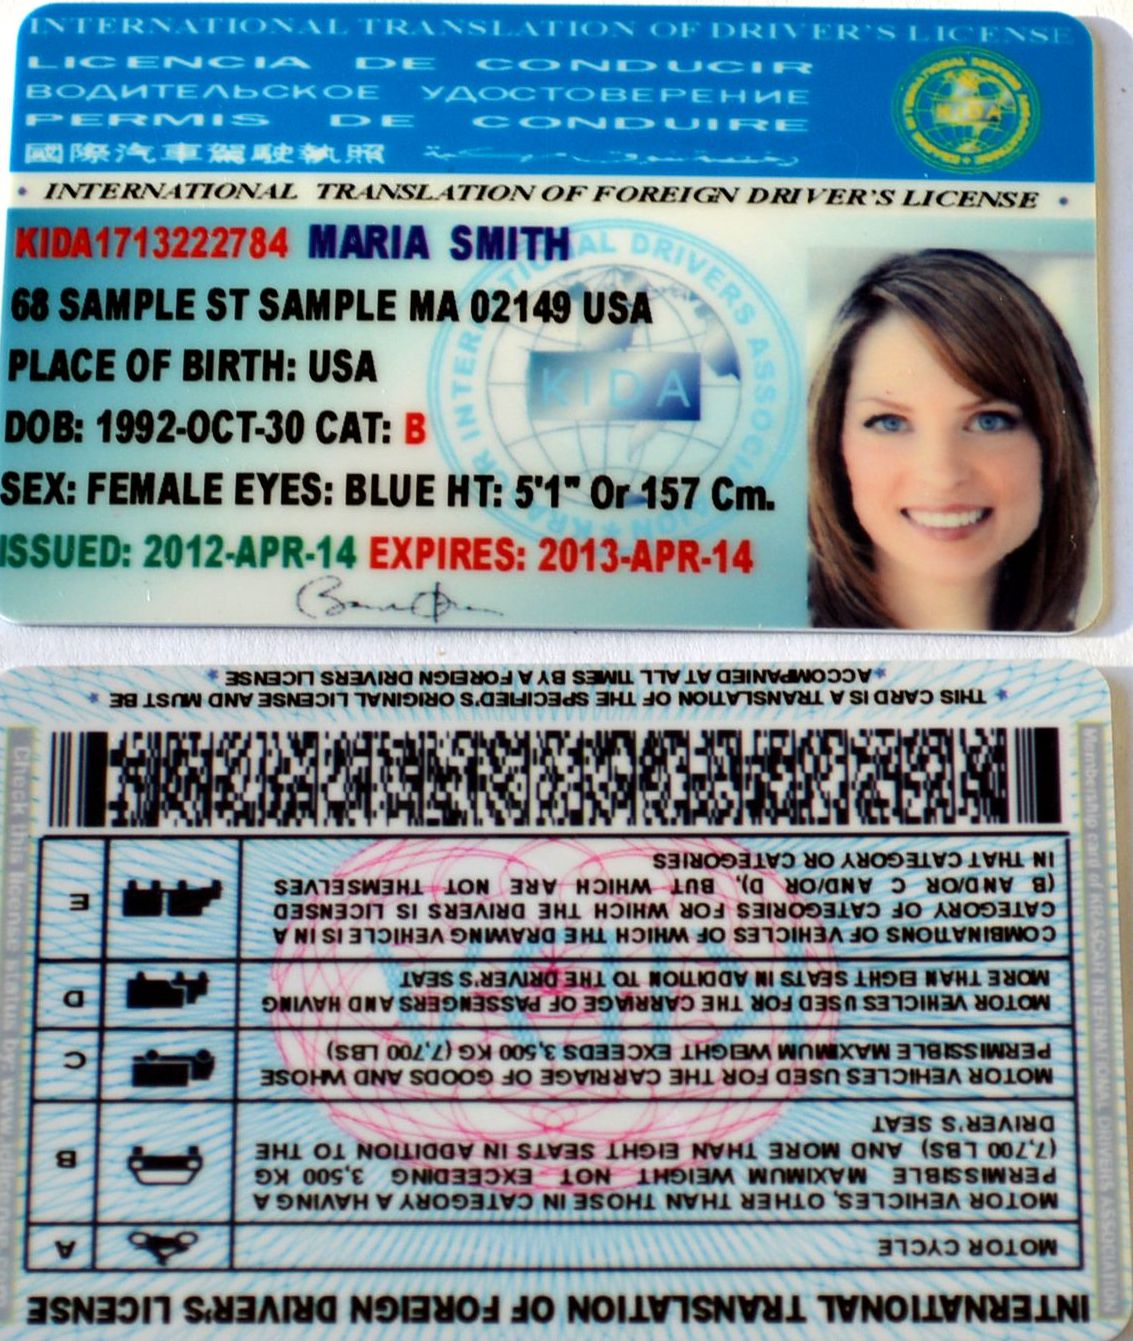 how to get international driver license in usa